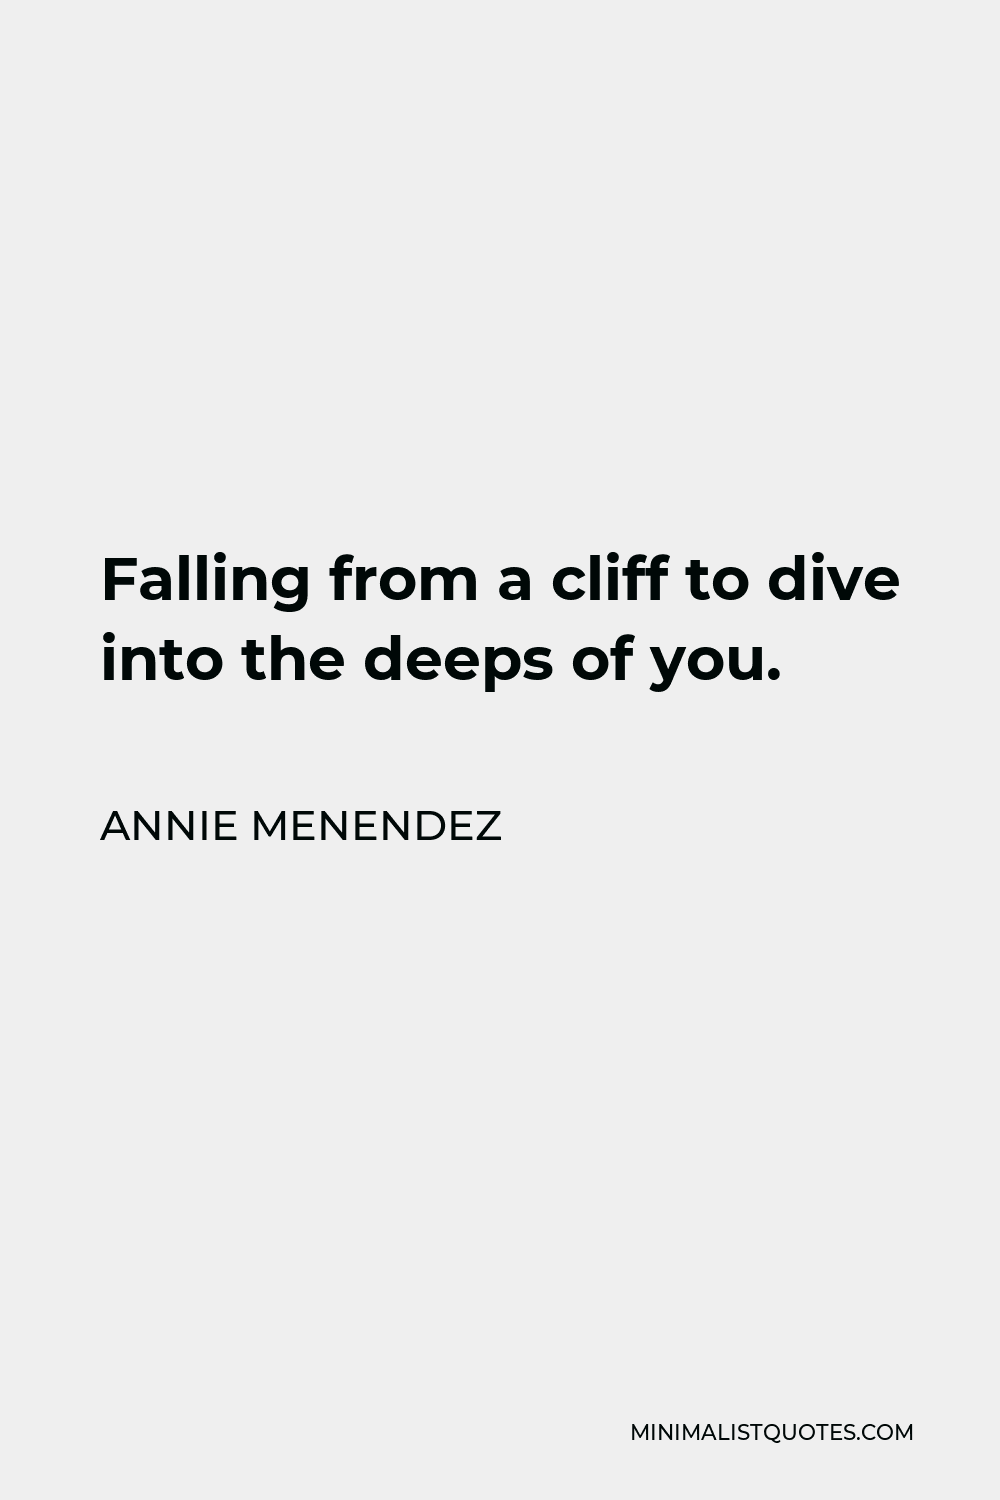 Annie Menendez Quote - Falling from a cliff to dive into the deeps of you.